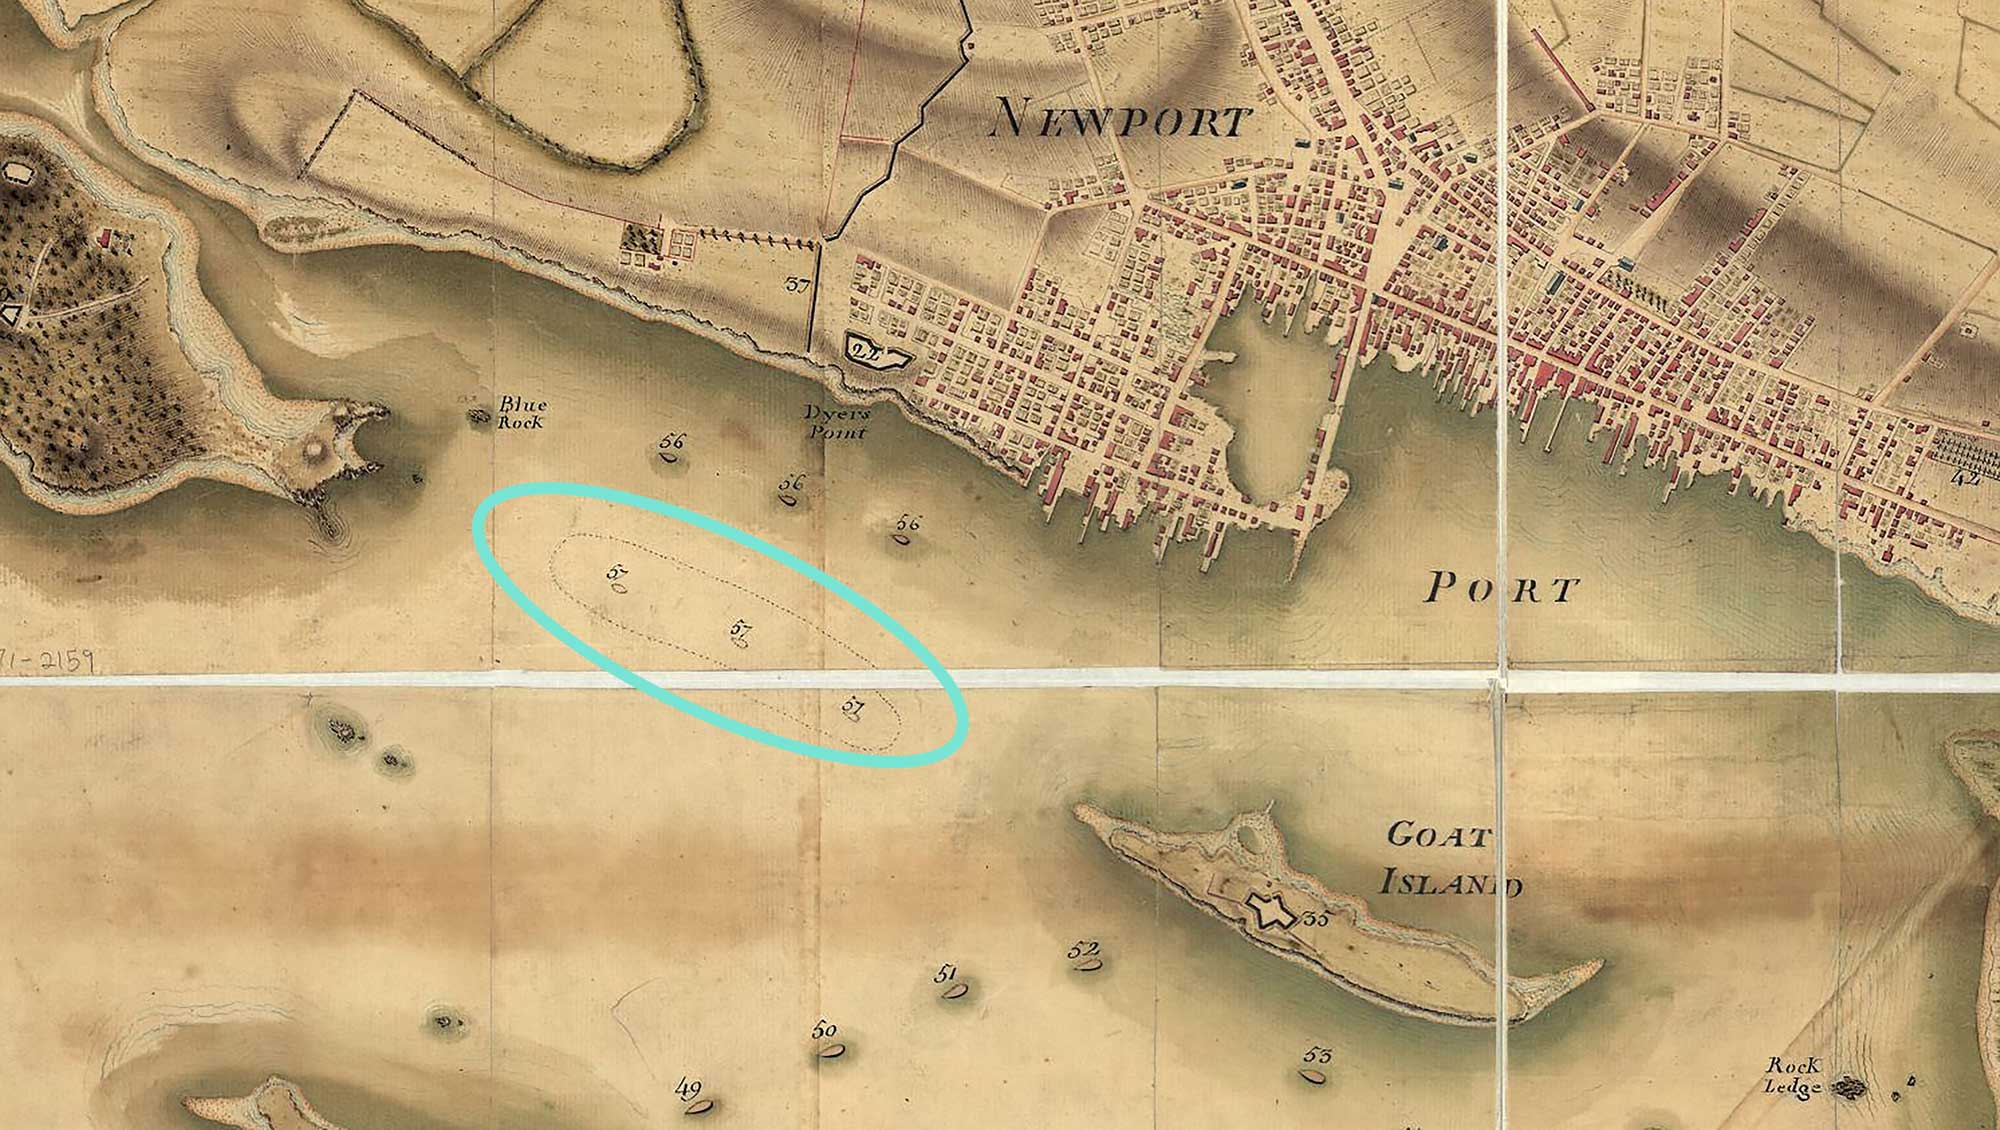 Section of French archival map entitled Prise de Newport par d'Estaing, 1778: 2. Embossage de Ternay à Newport, 1780, showing the location of the scuttled transports (including Lord Sandwich) between Goat Island and Newport’s North Battery. Map reproduction courtesy of the Norman B. Leventhal Map and Education Center at the Boston Public Library.